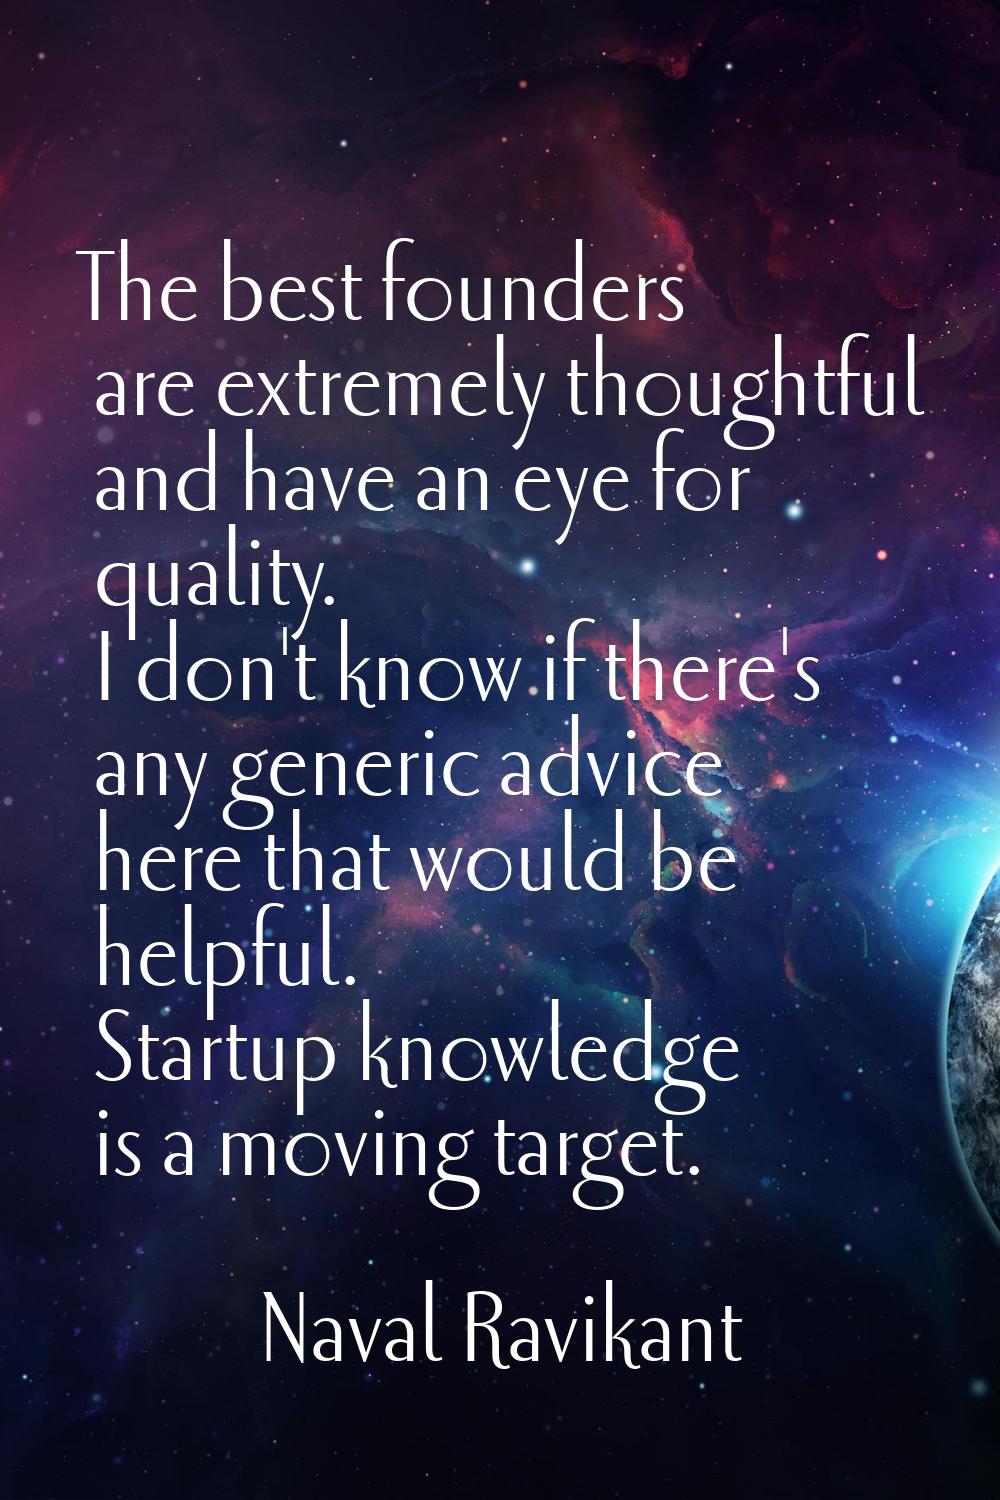 The best founders are extremely thoughtful and have an eye for quality. I don't know if there's any